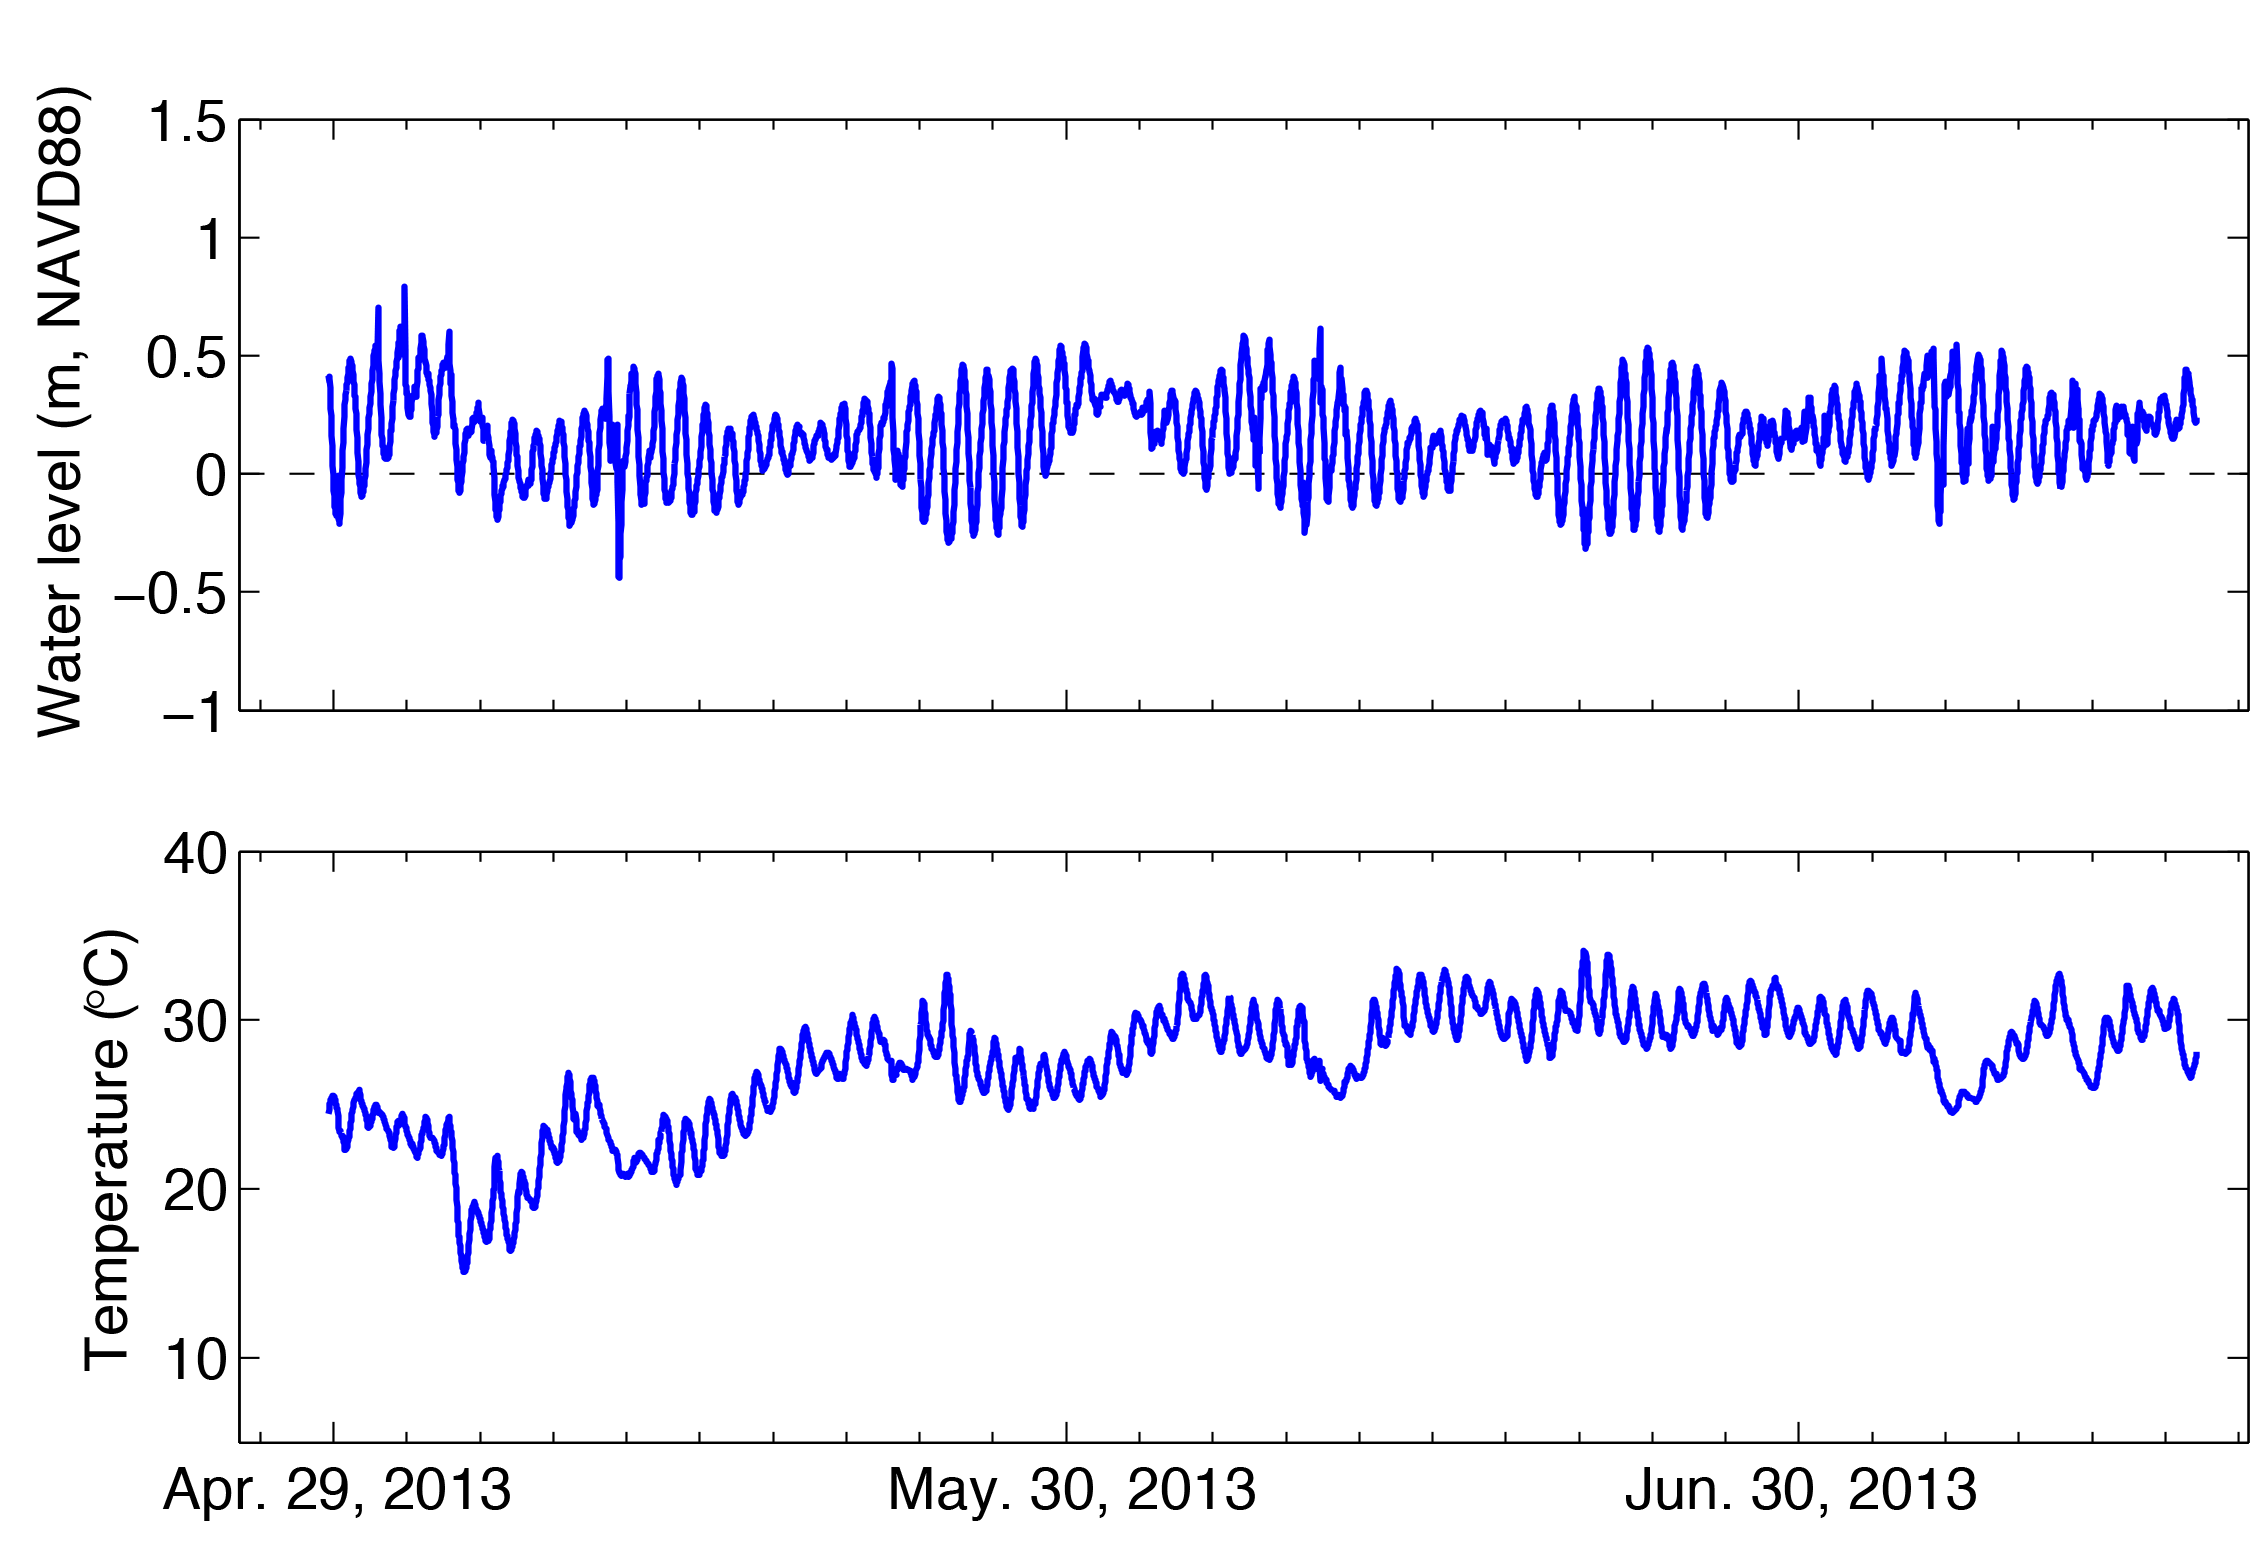 water level and temperature time series